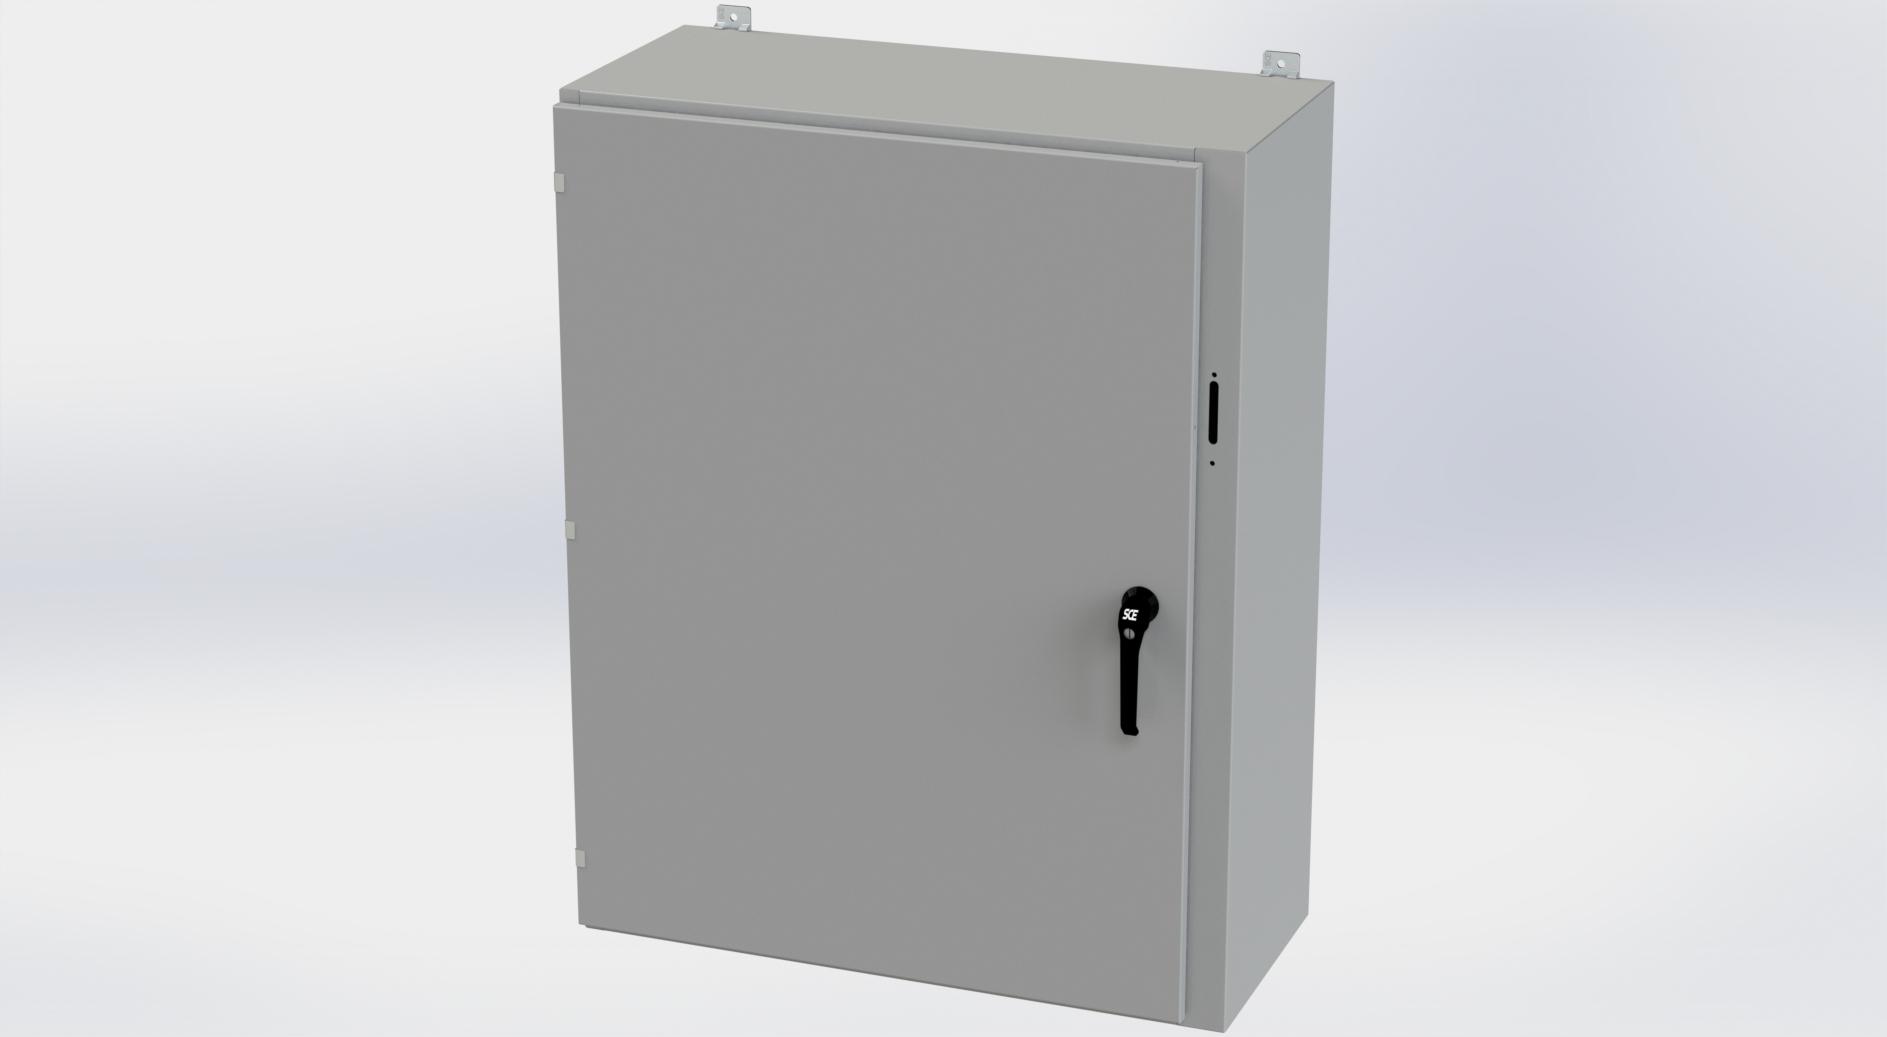 Saginaw Control SCE-48SA3816LPPL Obselete Use SCE-48XEL3716LP, Height:48.00", Width:37.38", Depth:16.00", ANSI-61 gray powder coating inside and out. Optional sub-panels are powder coated white.